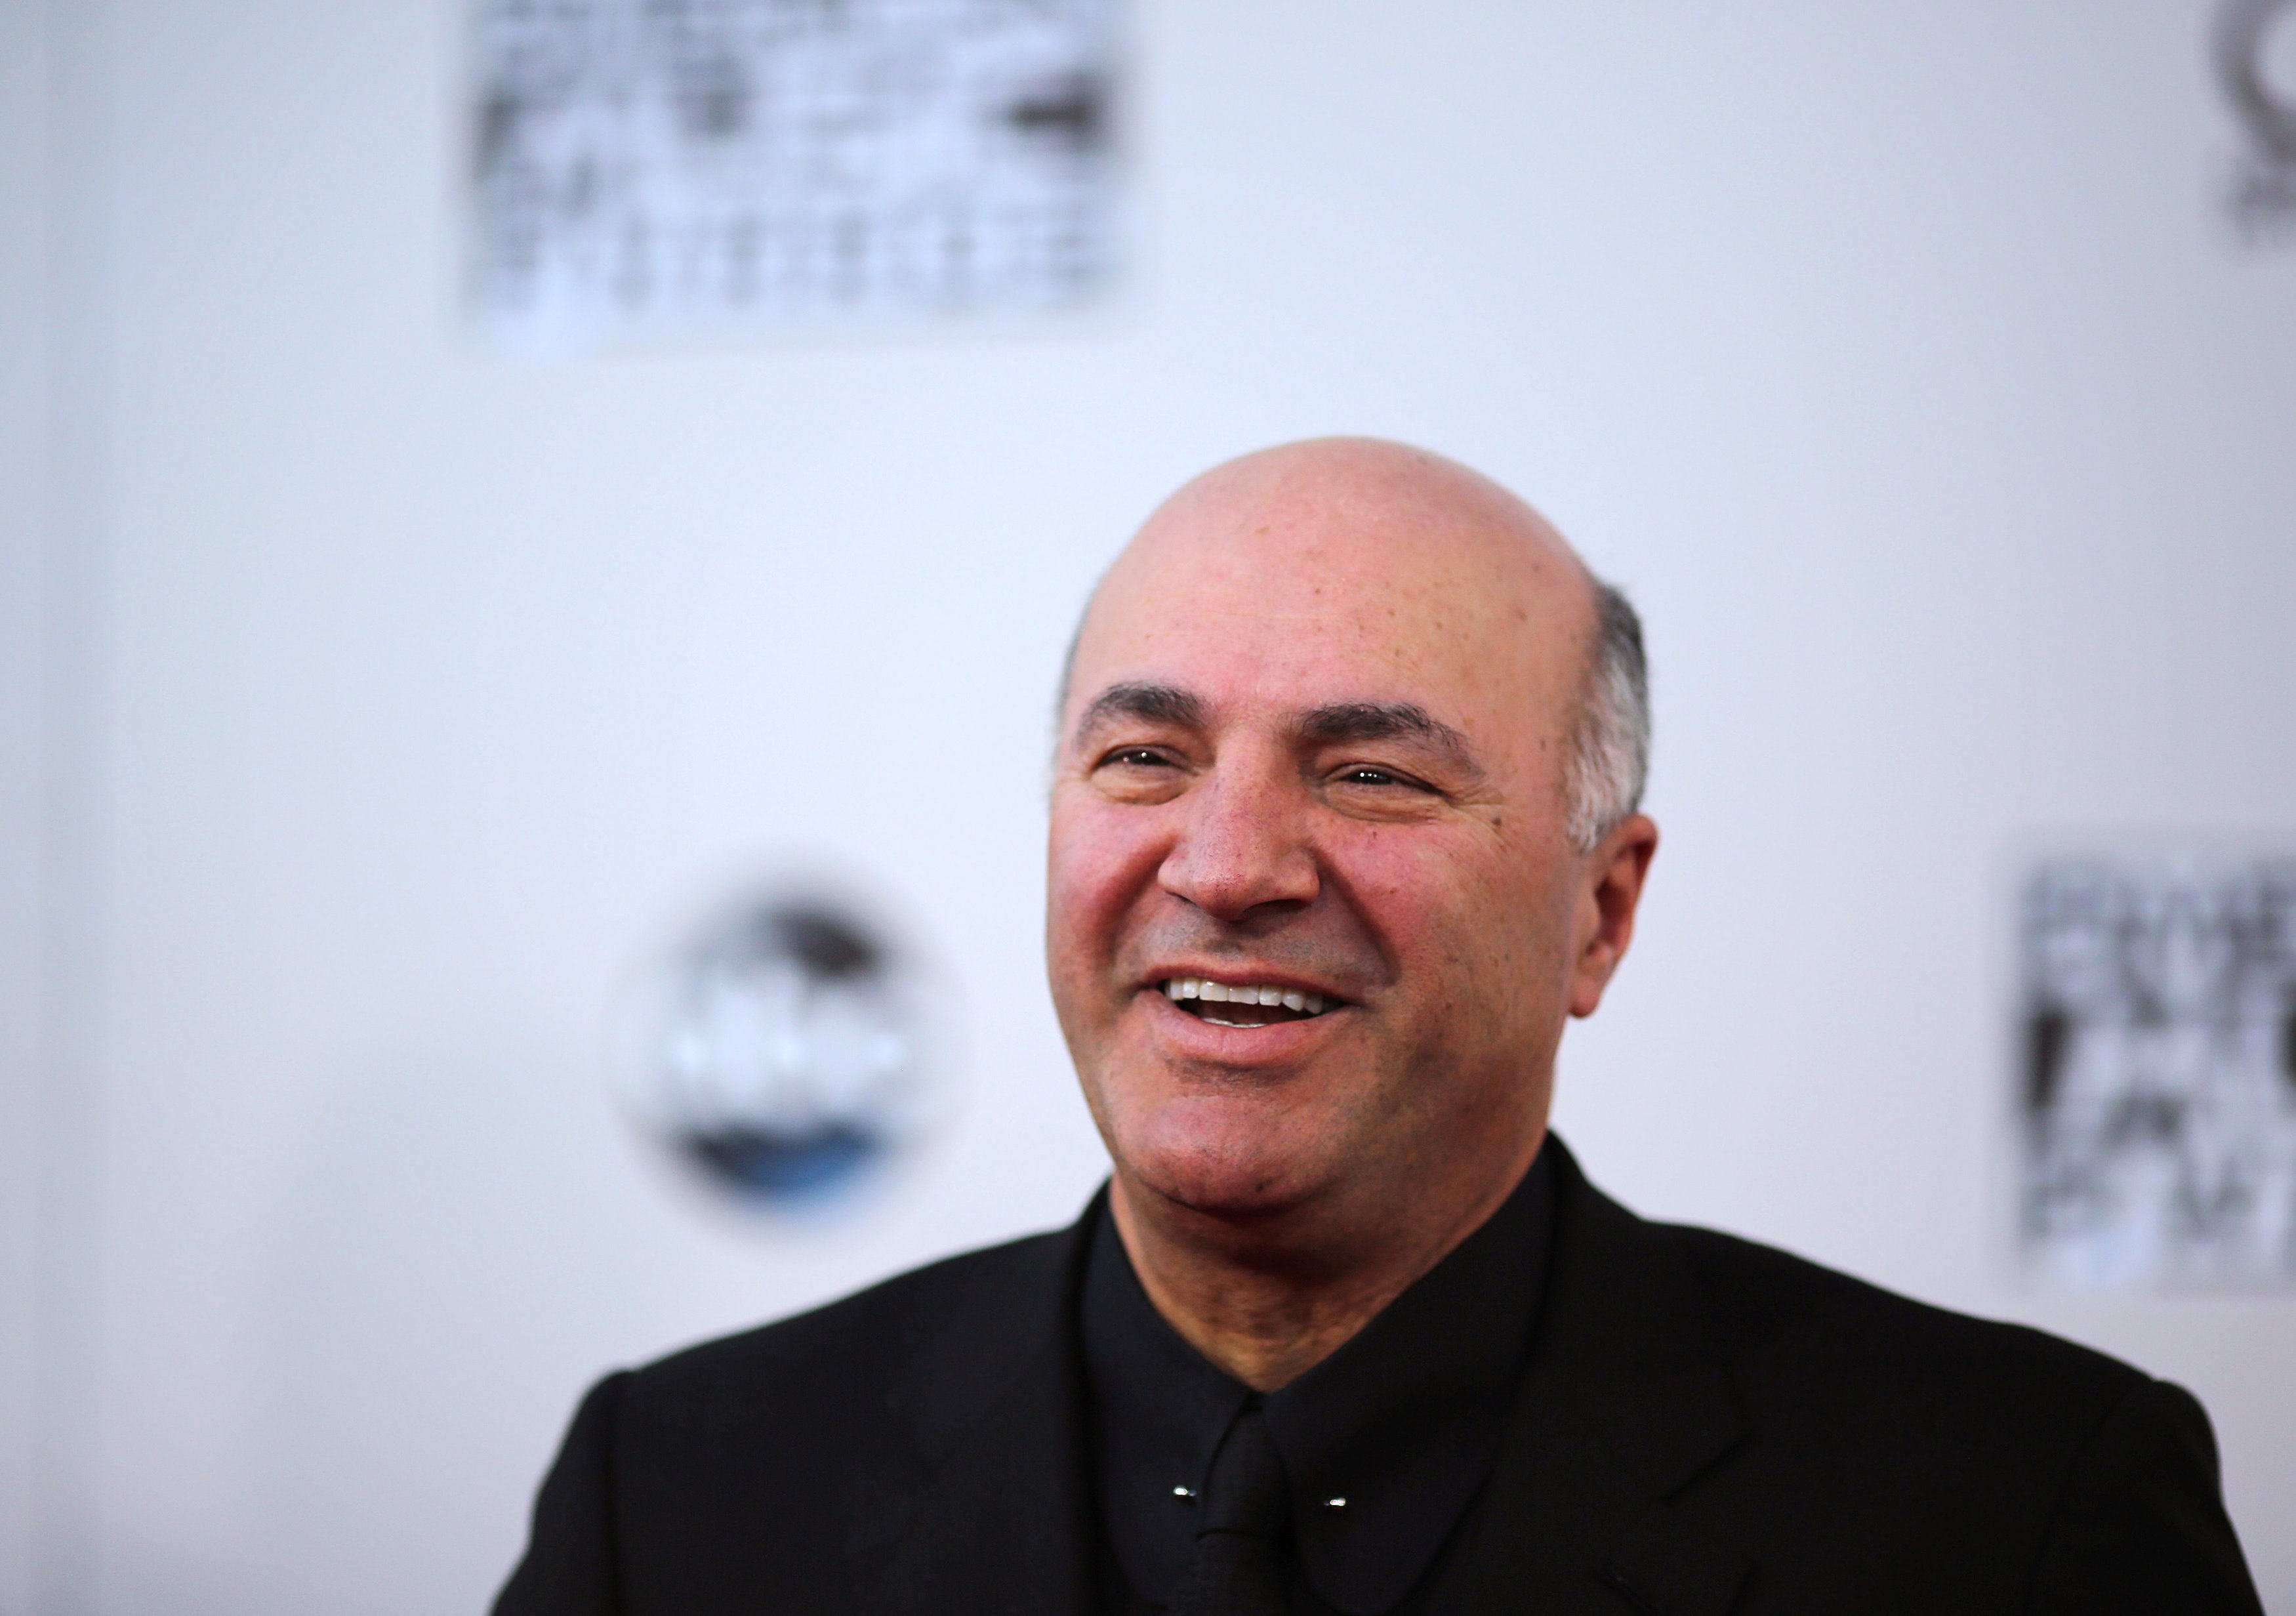 Canadian investor, and Shark Tank star, Kevin O’Leary has set up a crowdfunding campaign to buy TikTok. Photo: Reuters